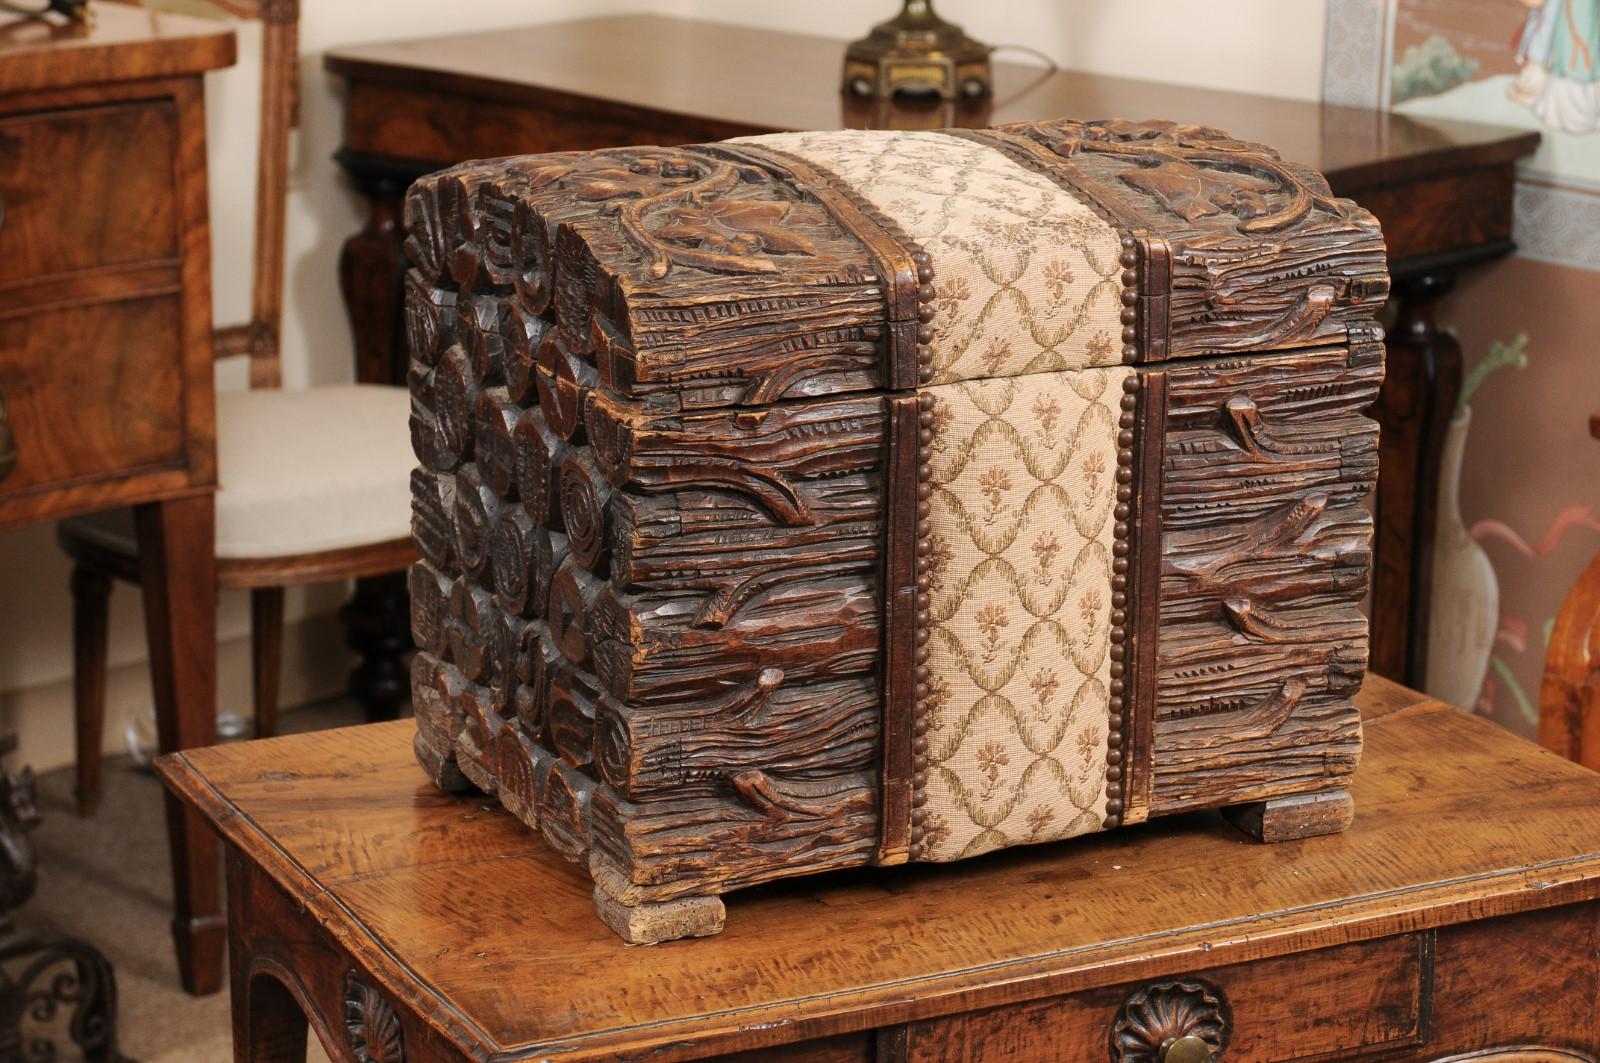 French Black Forest carved wood trunk with hinged lift top and grapevine motif, circa 1890.